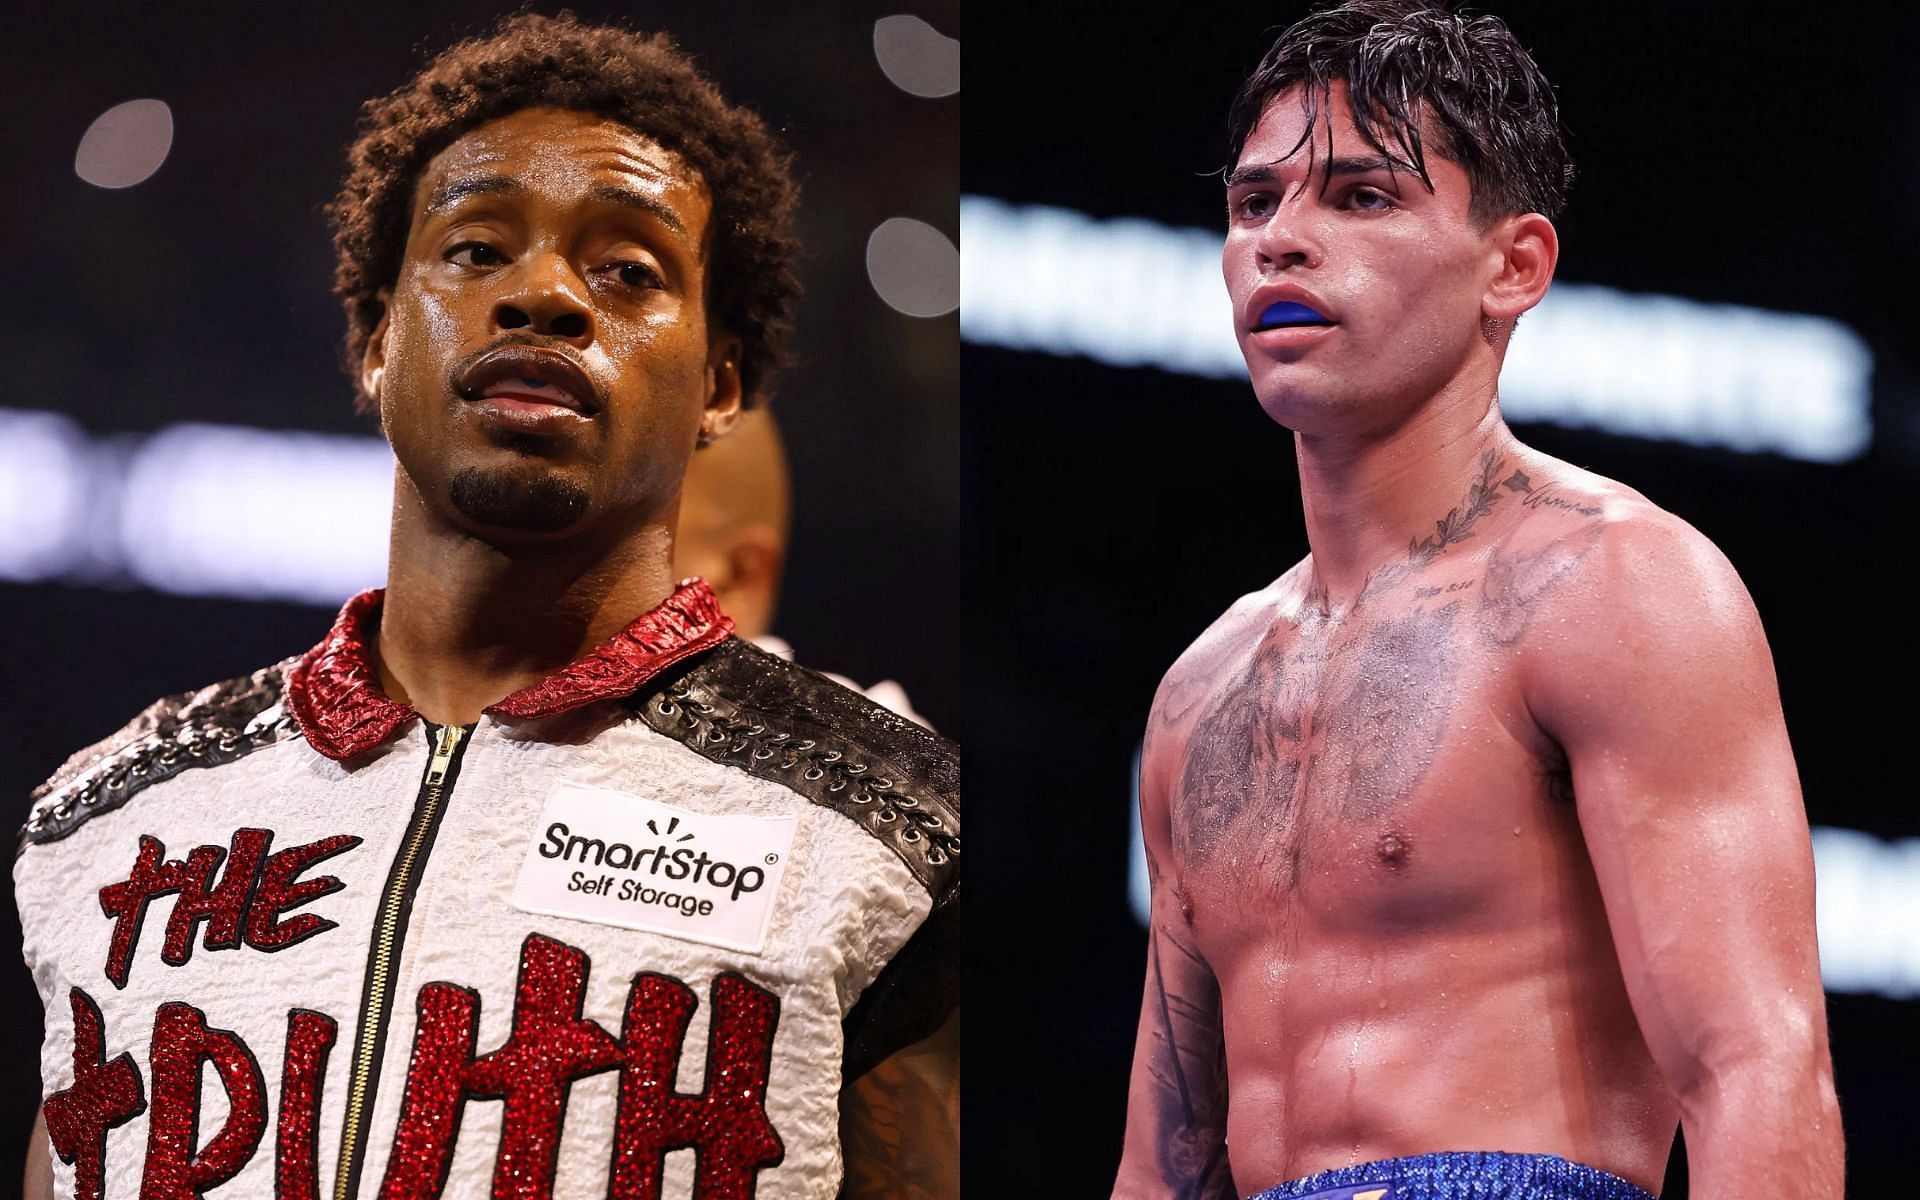 Errol Spence Jr. (left) takes aim at Ryan Garcia (right) in new battle of words [Images Courtesy: @GettyImages]